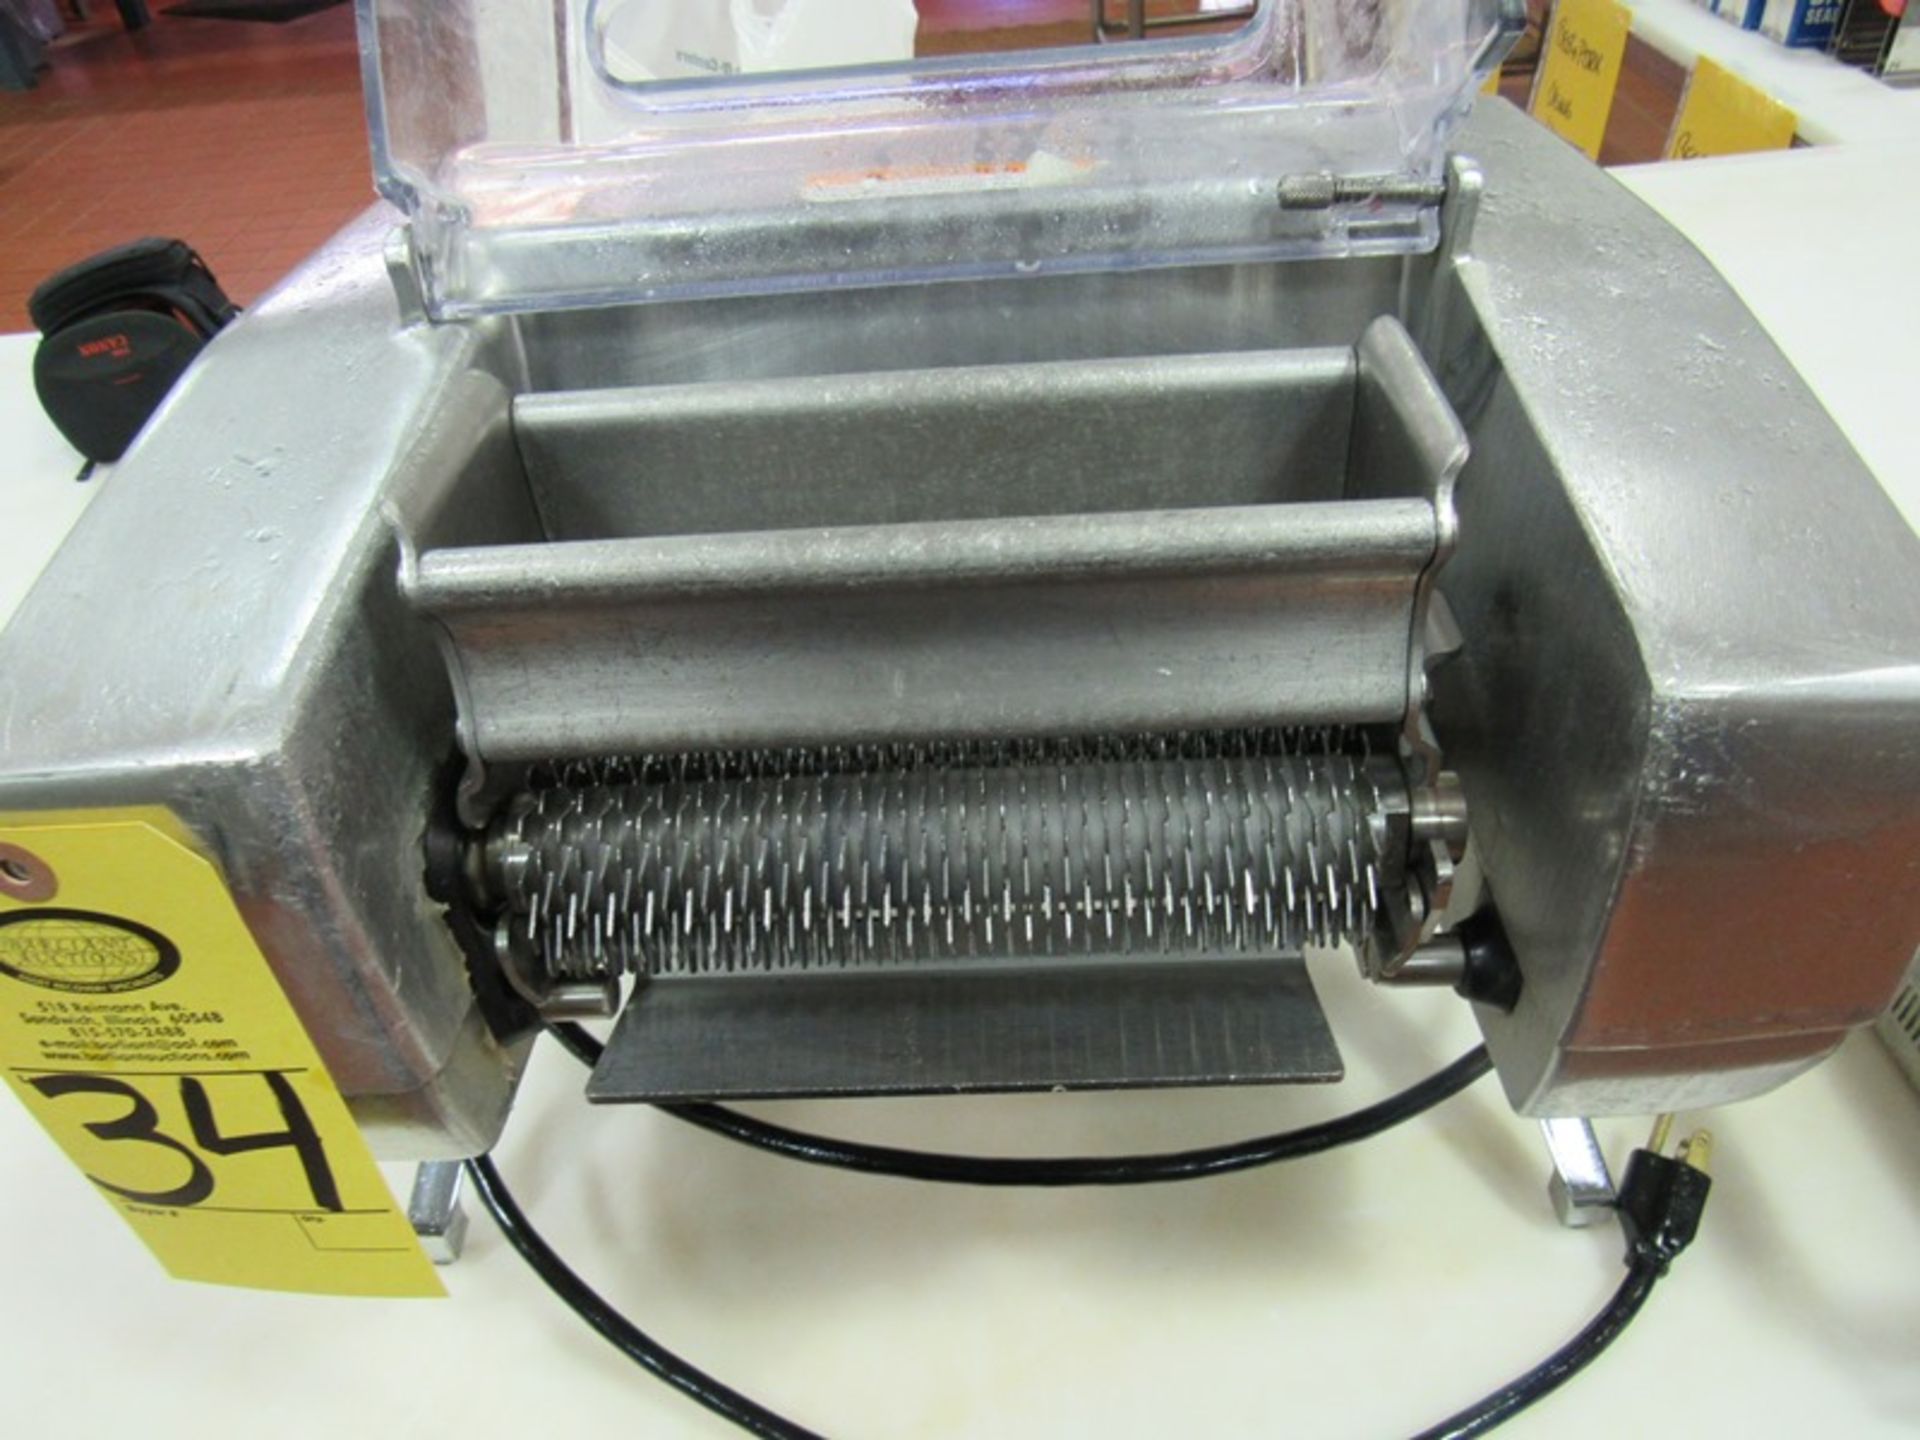 Berkel Table Top Tenderizer, 7" wide blades, 110 volts(Required Loading Fee $10.00 - Small Items - Image 2 of 3